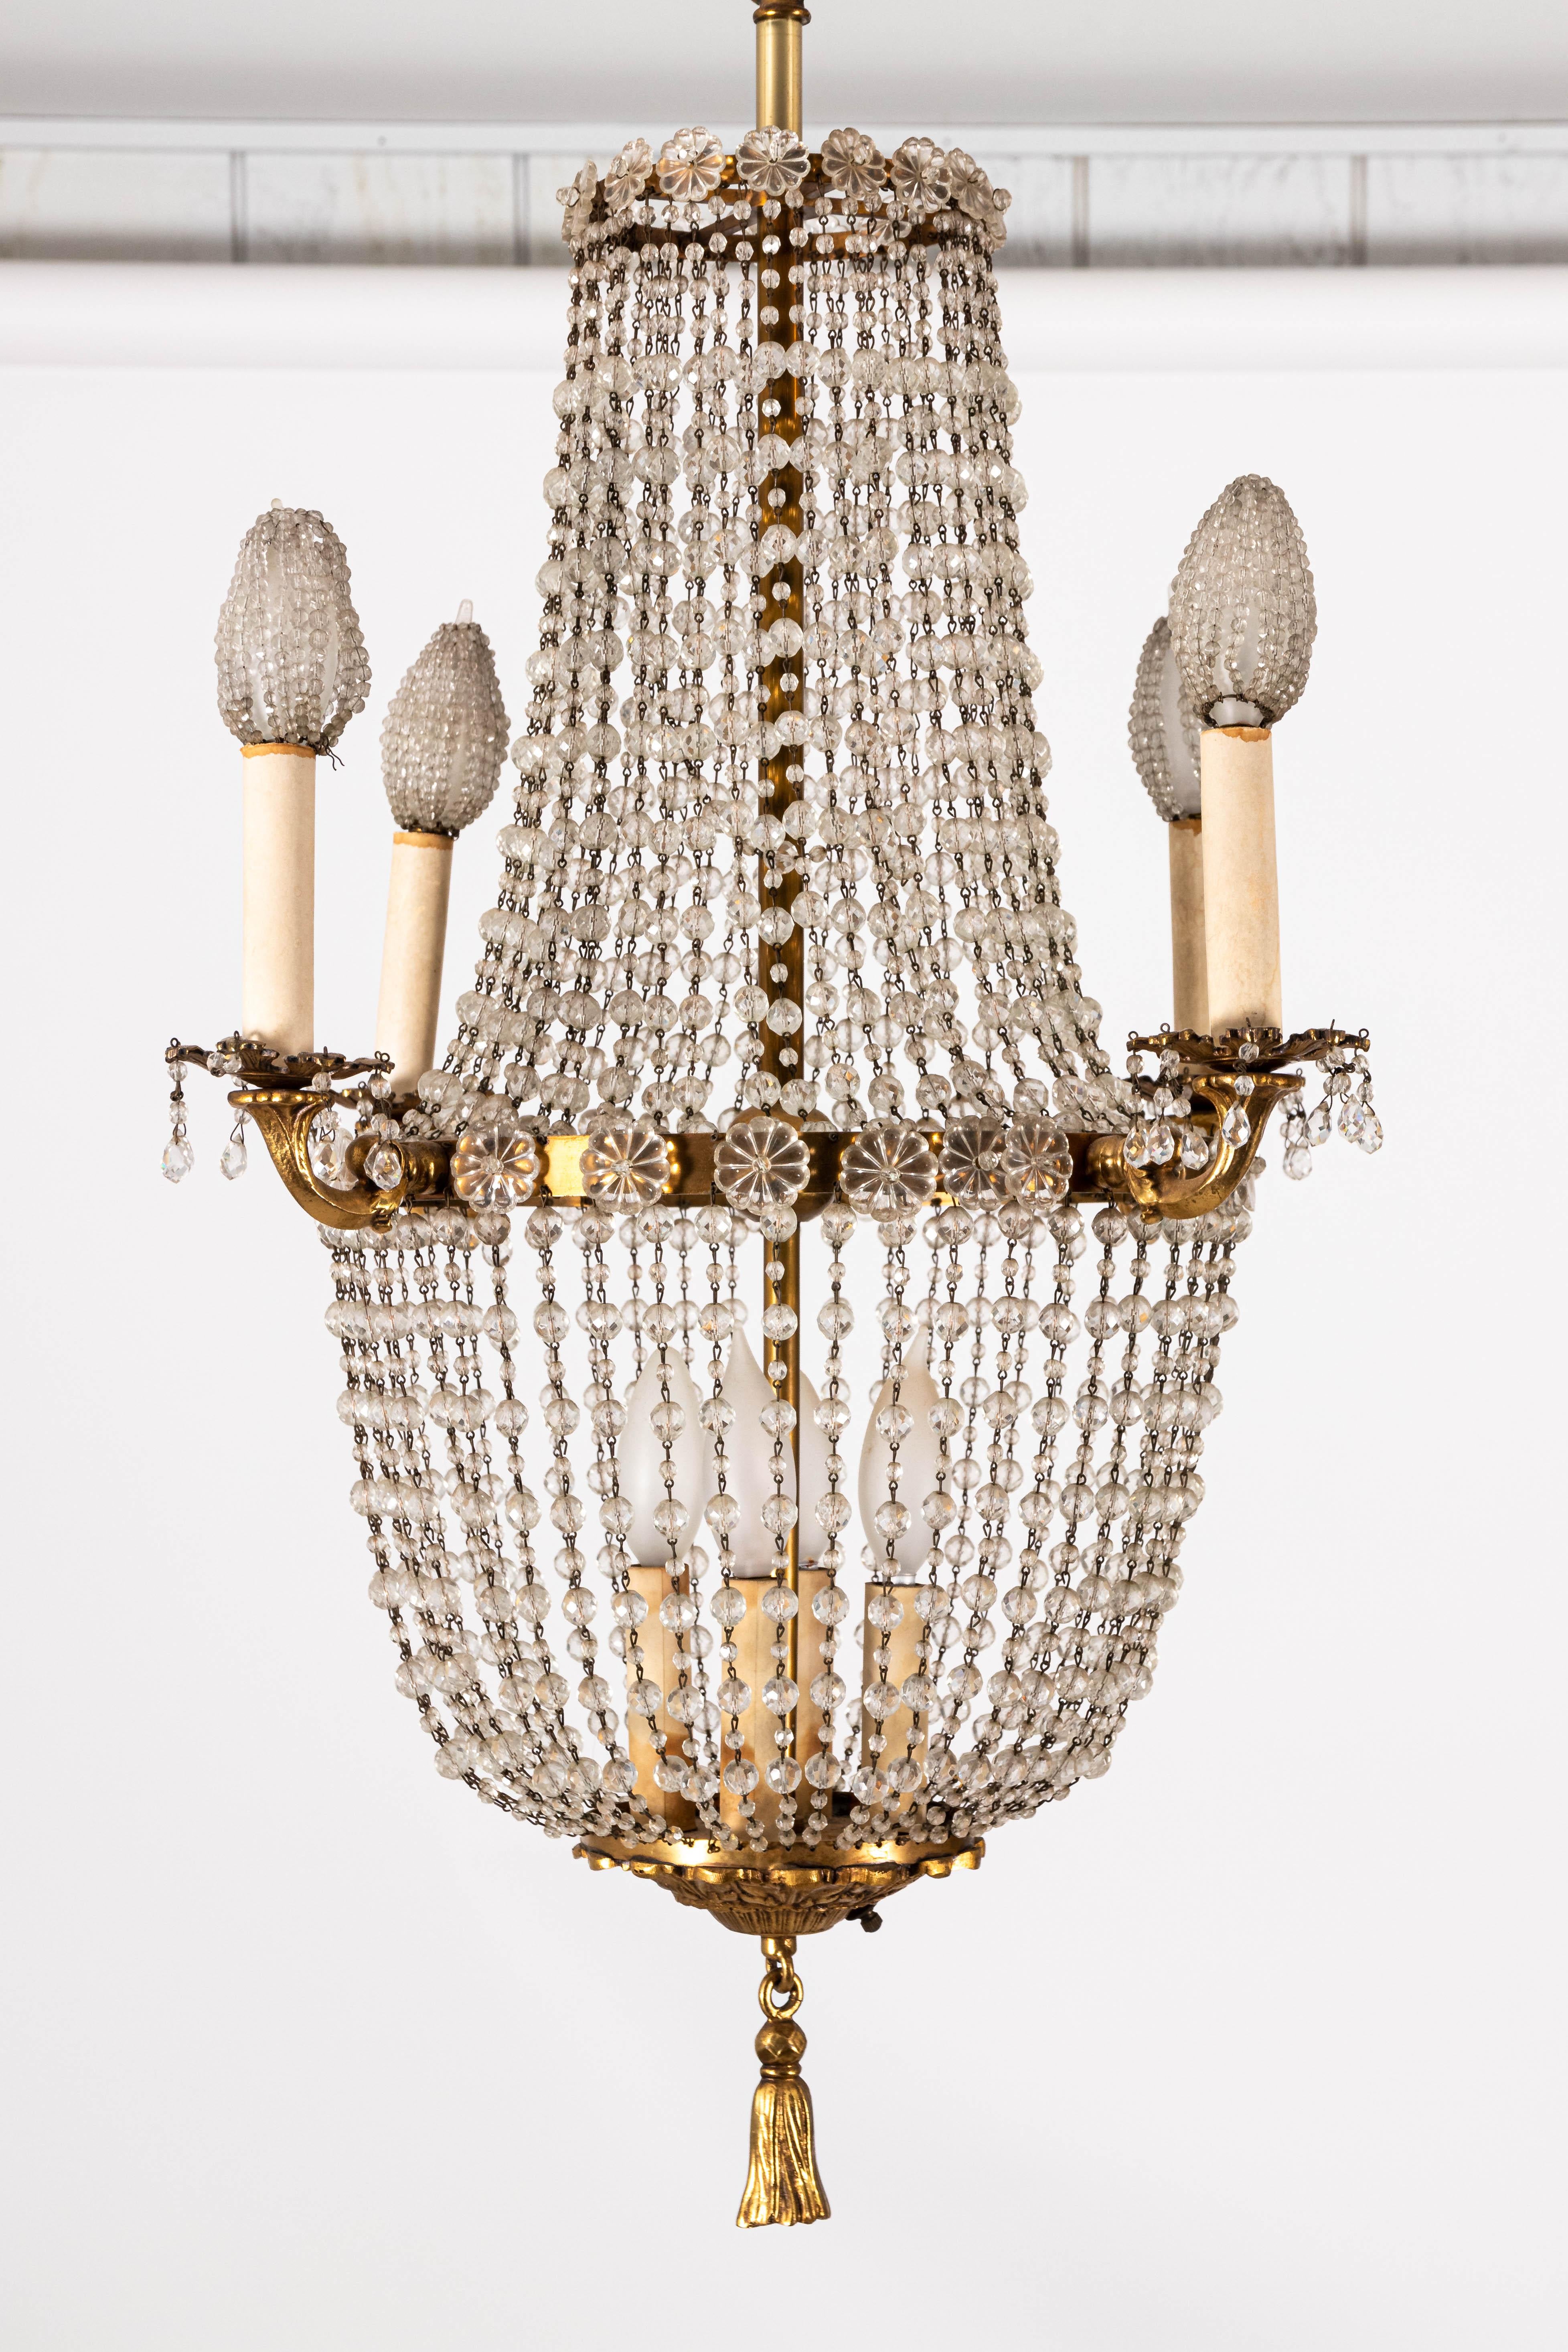 French style crystal beaded brass chandelier with four external arms with beaded bulb covers and three internal lights inside the basket frame.